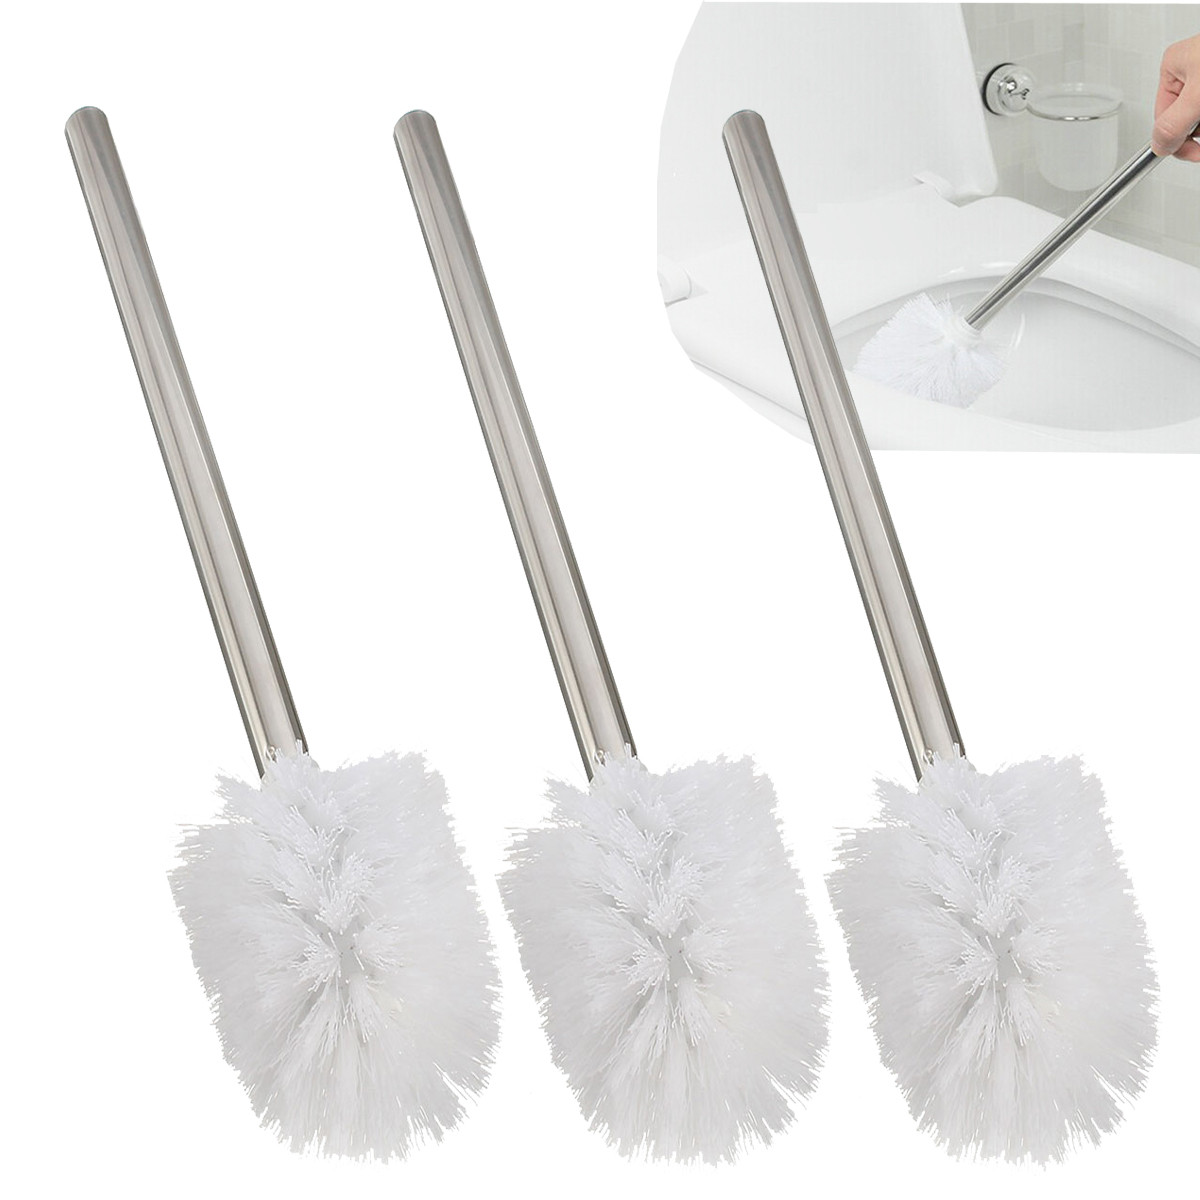 Stainless-Steel-WC-Bathroom-Cleaning-Toilet-Brush-White-Head-Holders-Cleaning-Brushes-1137680-9